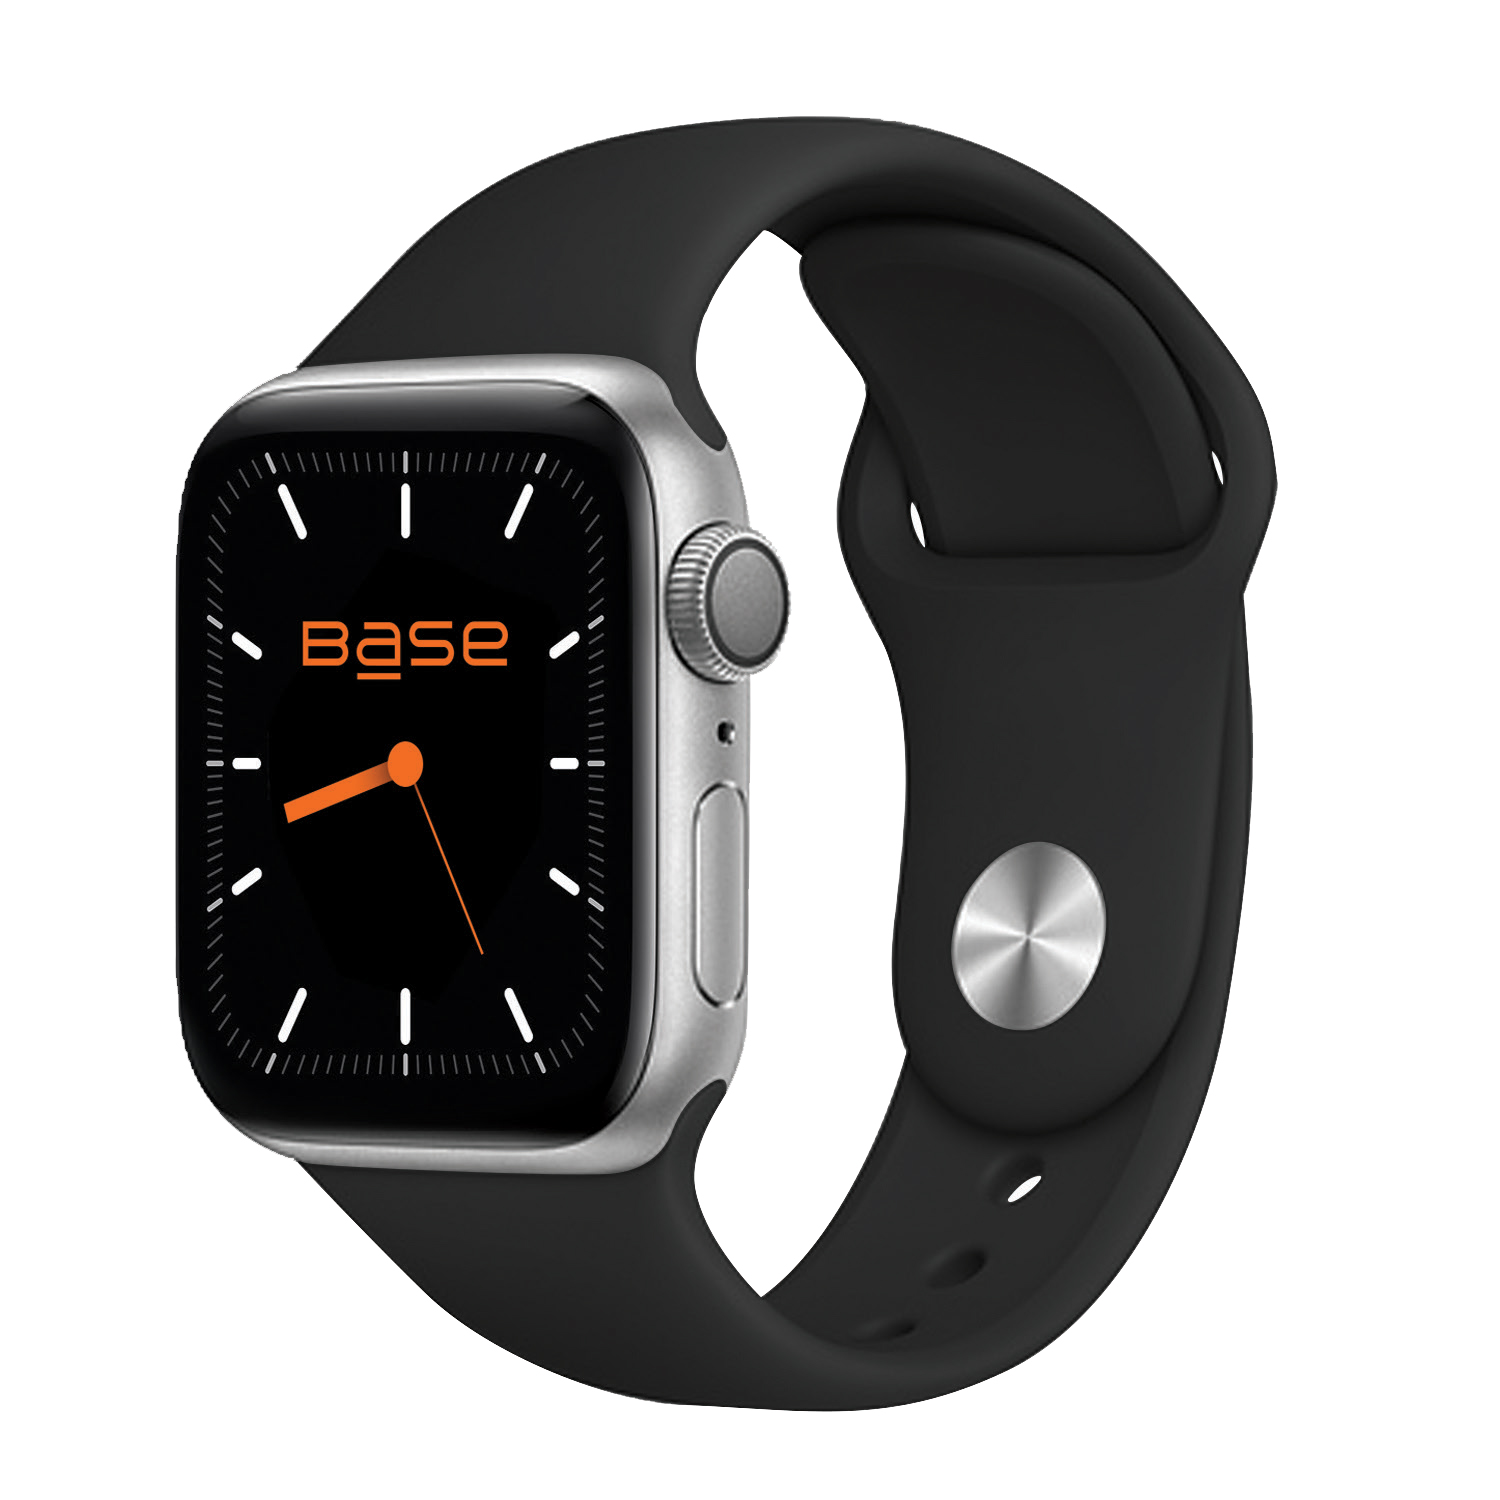 Black soft smooth Apple Watch silicone band for Series 1/2/3/4/5/6/7/SE - Large size (42/44/45mm)